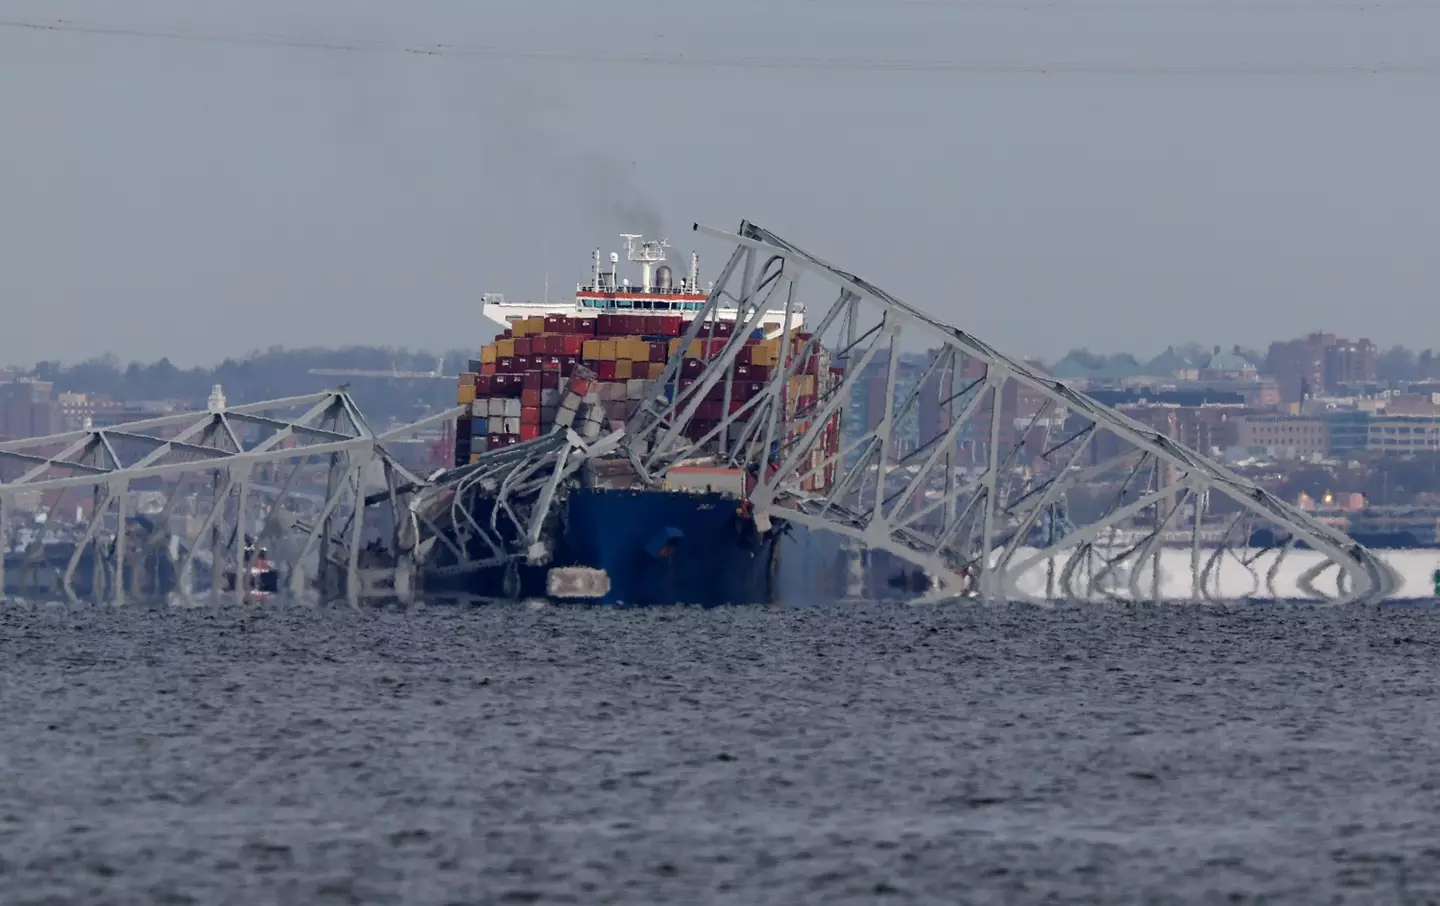 The ship crashed into Key Bridge in the early hours of March 26.